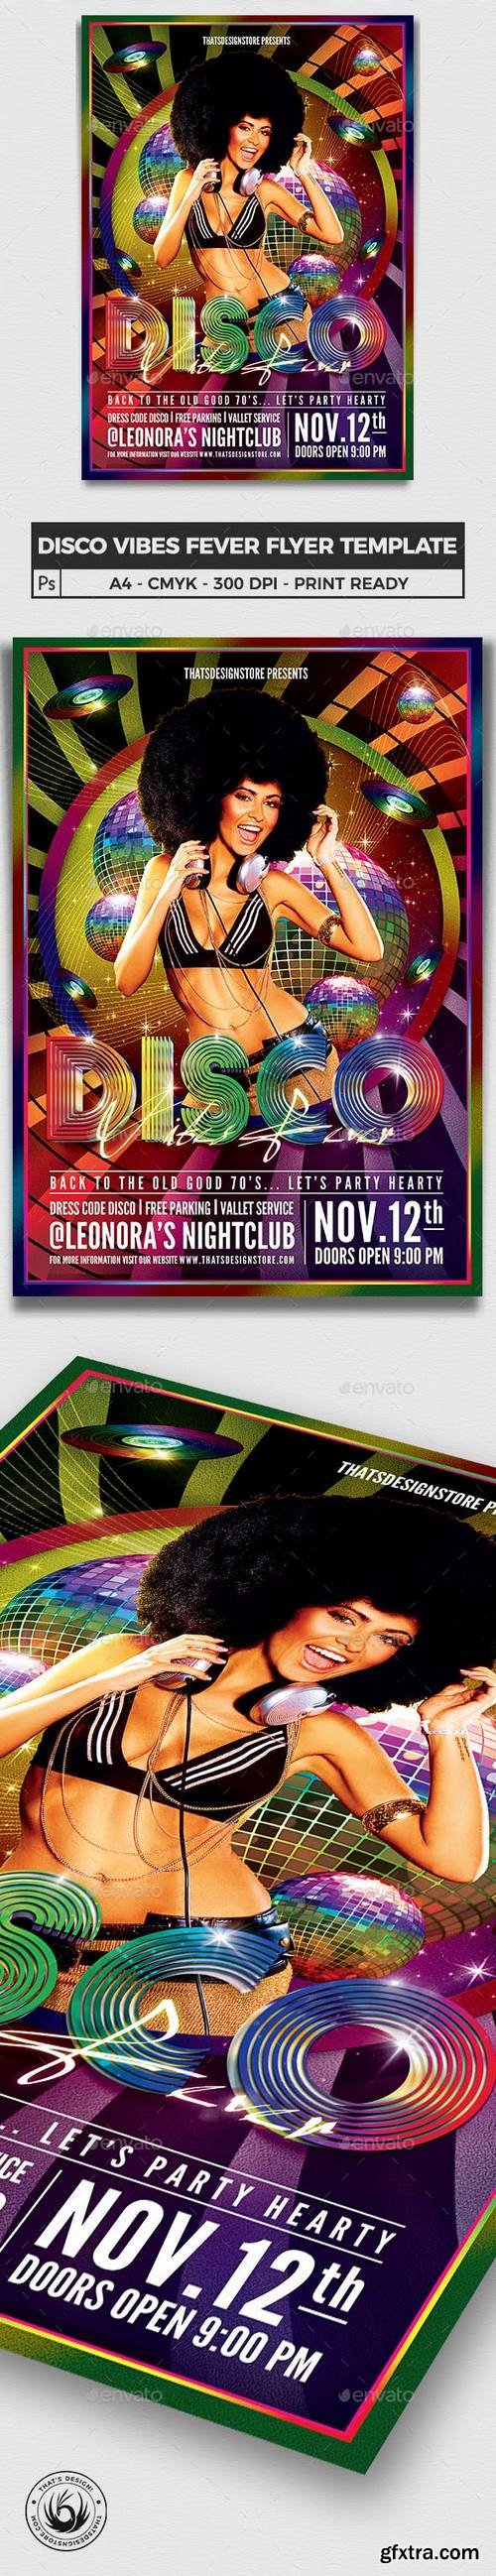 Graphicriver - Disco Vibes Fever Flyer Template 5811078